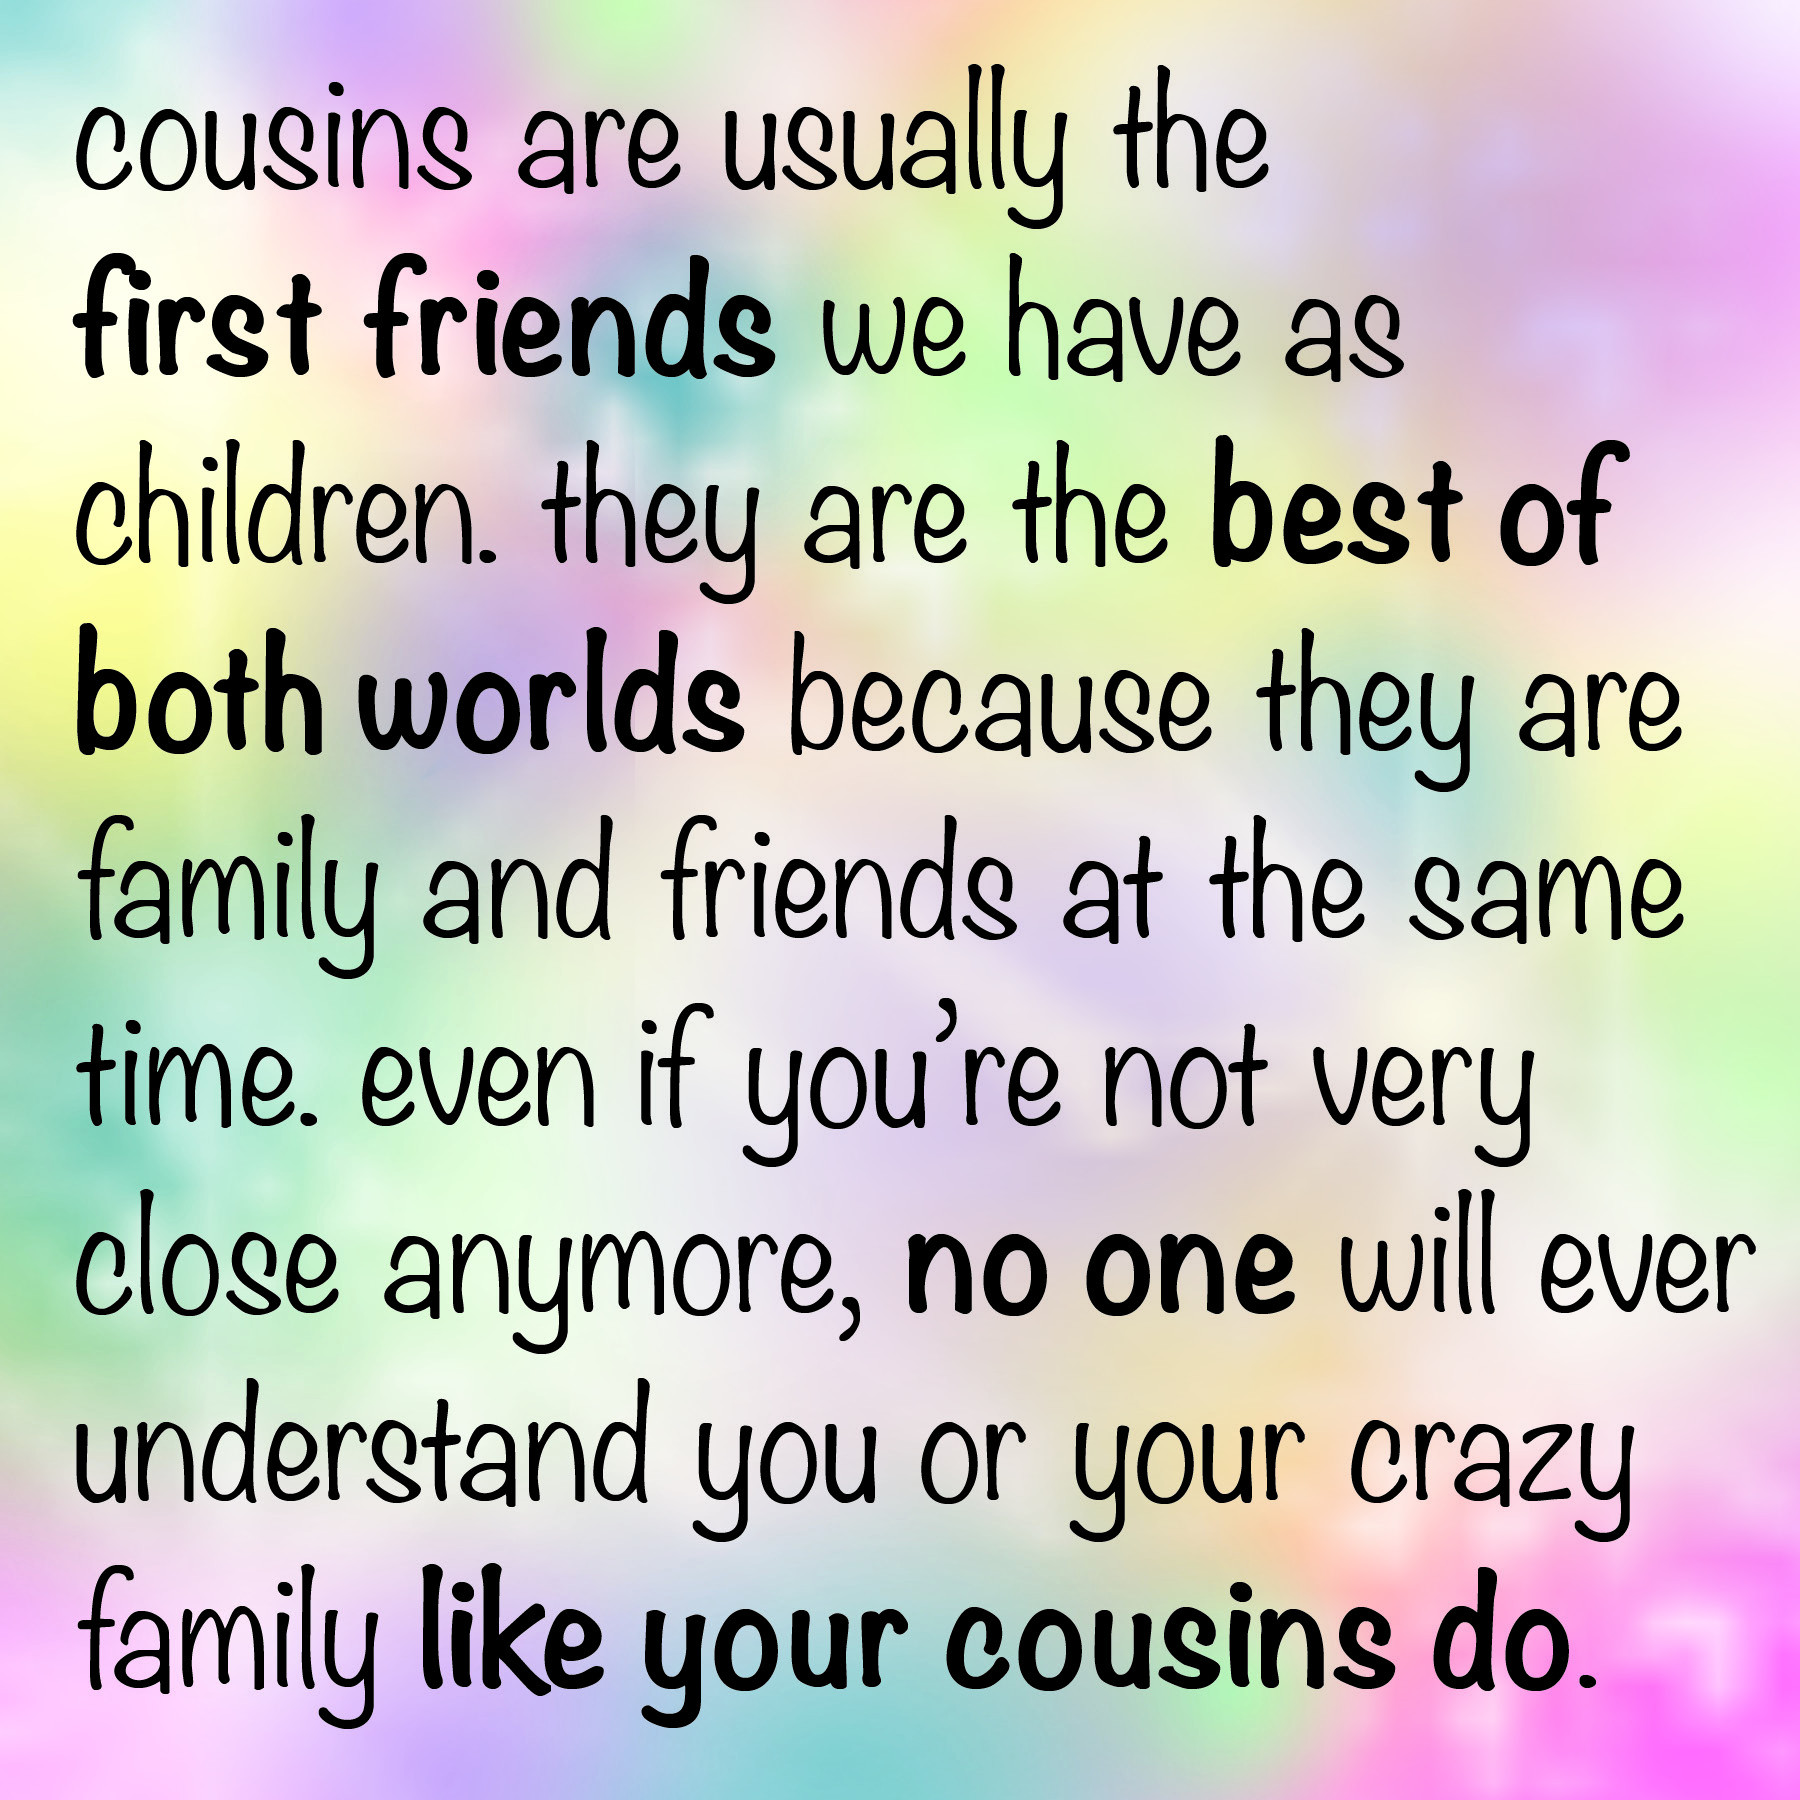 Cousin Family Quotes
 Family Quotes For Cousins QuotesGram